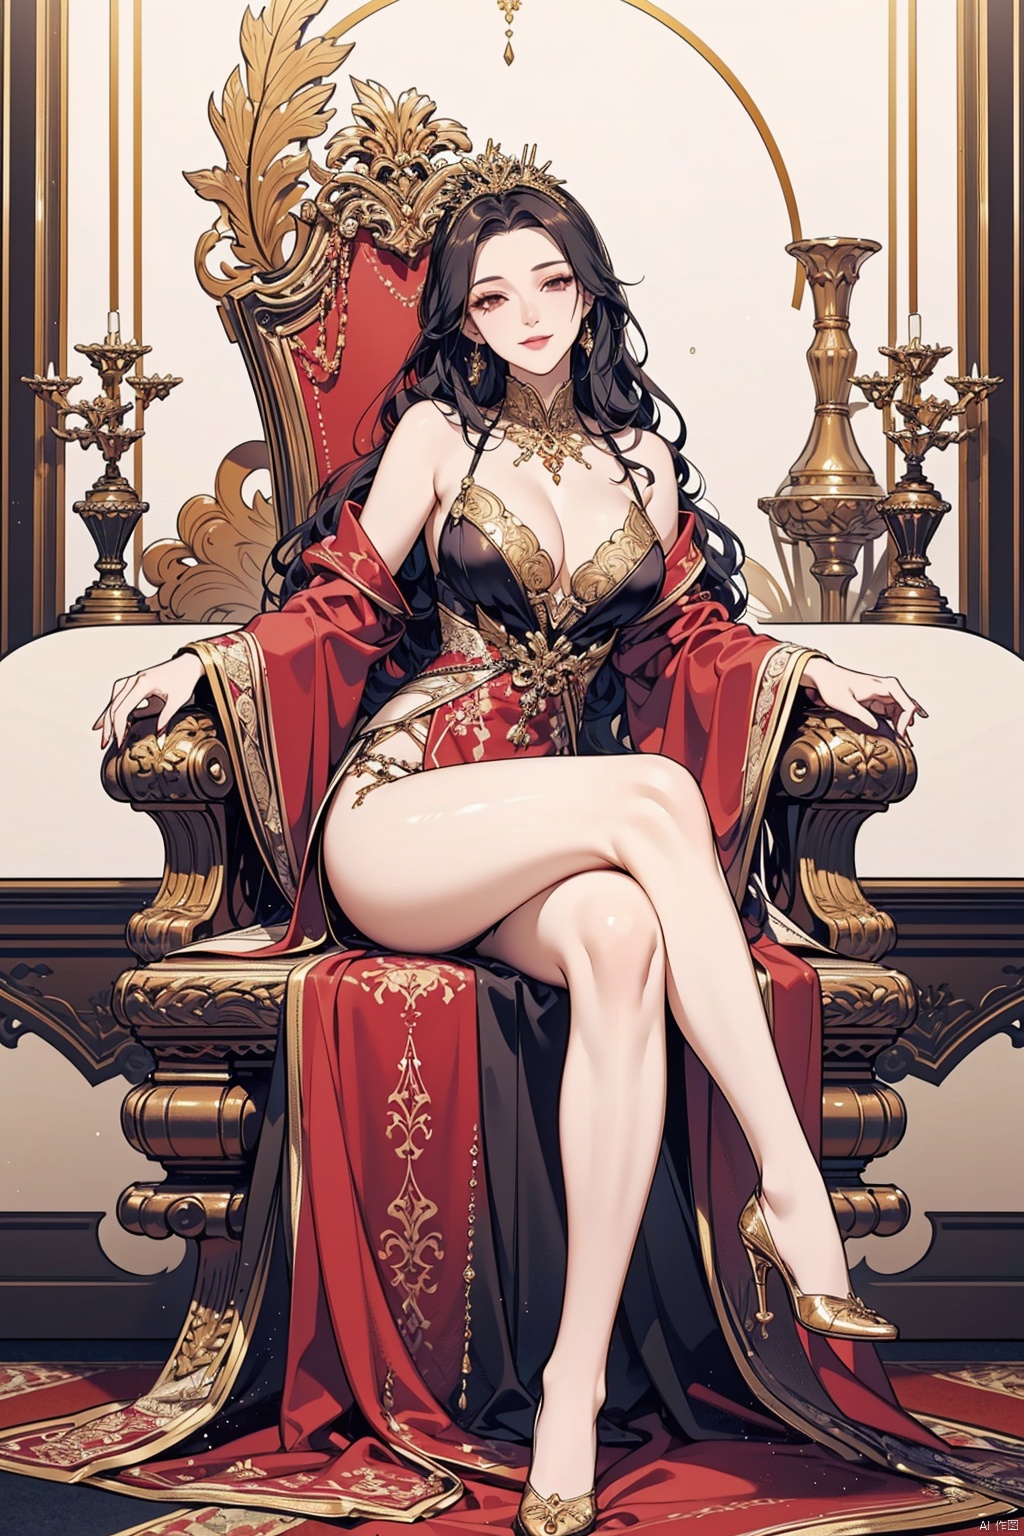  &quot;In a sensual throne scene, the anime-style Queen, seductively aged 35, sits majestically on her ornate golden throne, surrounded by towering marble columns and a rich tapestry of royal heritage, wearing a luxurious crimson velvet The gown hugged her curves, revealing a plunging neckline and thigh-high slit that accentuated her statuesque figure. The skirt was embellished with intricate gold embroidery and bejeweled embellishments, her legs were crossed, and her long scarlet hair was styled in a big The wavy form hangs down from her back, on the luxurious velvet footstool, ((majestic posture)), the majestic gaze, and the seductive smile, embodying the irresistible temptation and unyielding power of the king.&quot;